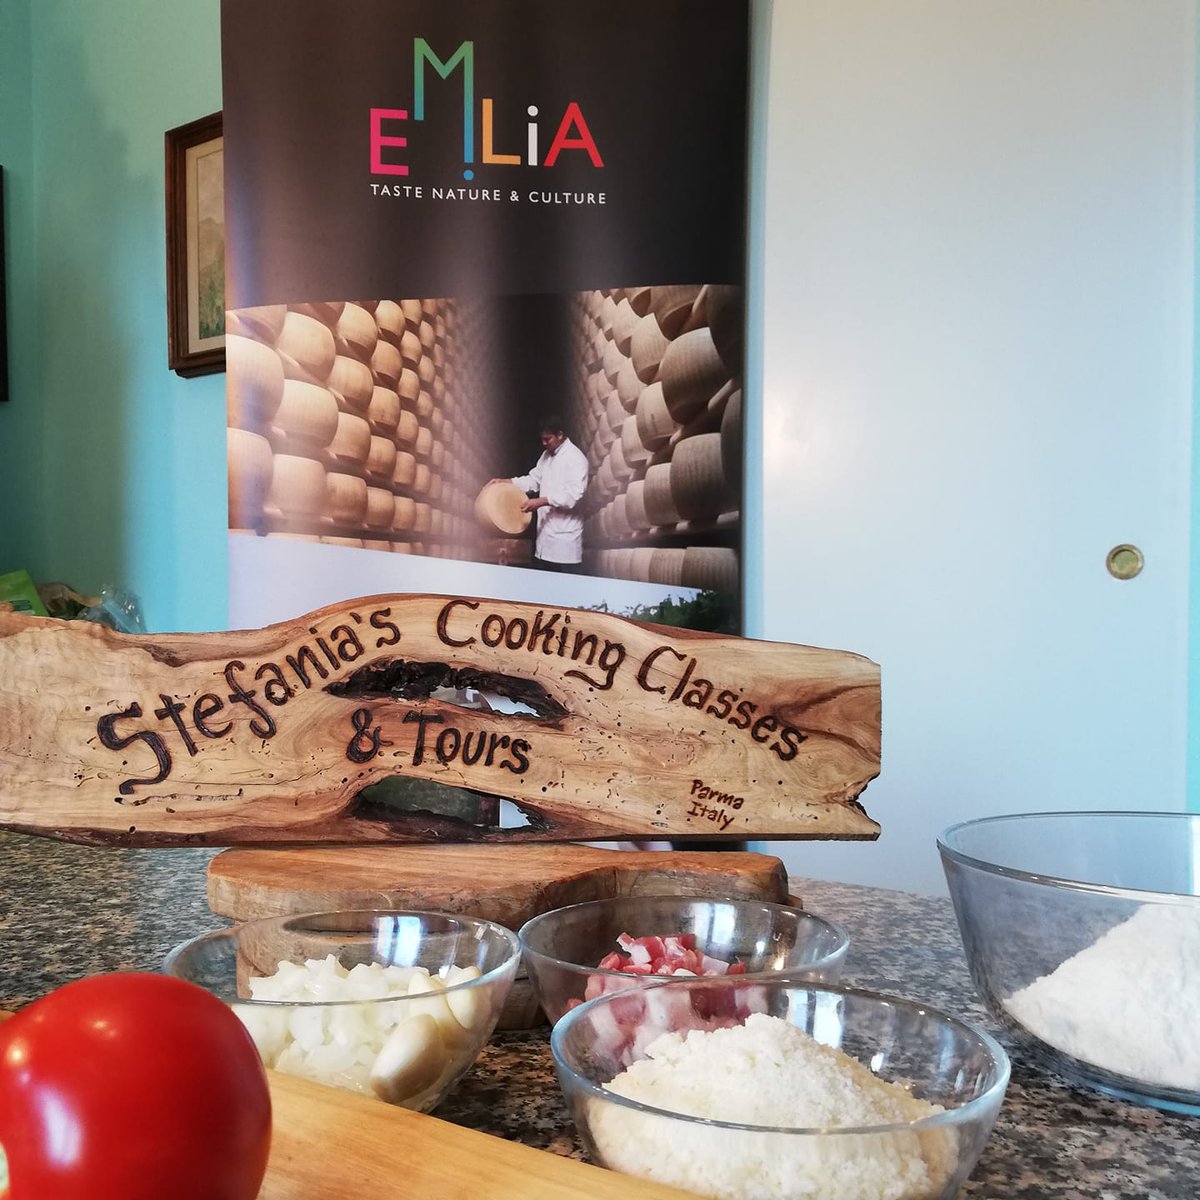 Everything is ready for the virtual cooking class with American and Canadian #touroperators and #journalists . Thanks to #enit and #visitemilia for this great opportunity!
#stefaniascookingclasses_tours #welcometoemiliaromagna
#parmacityofgastronomy #visitparma #italianfoodlover